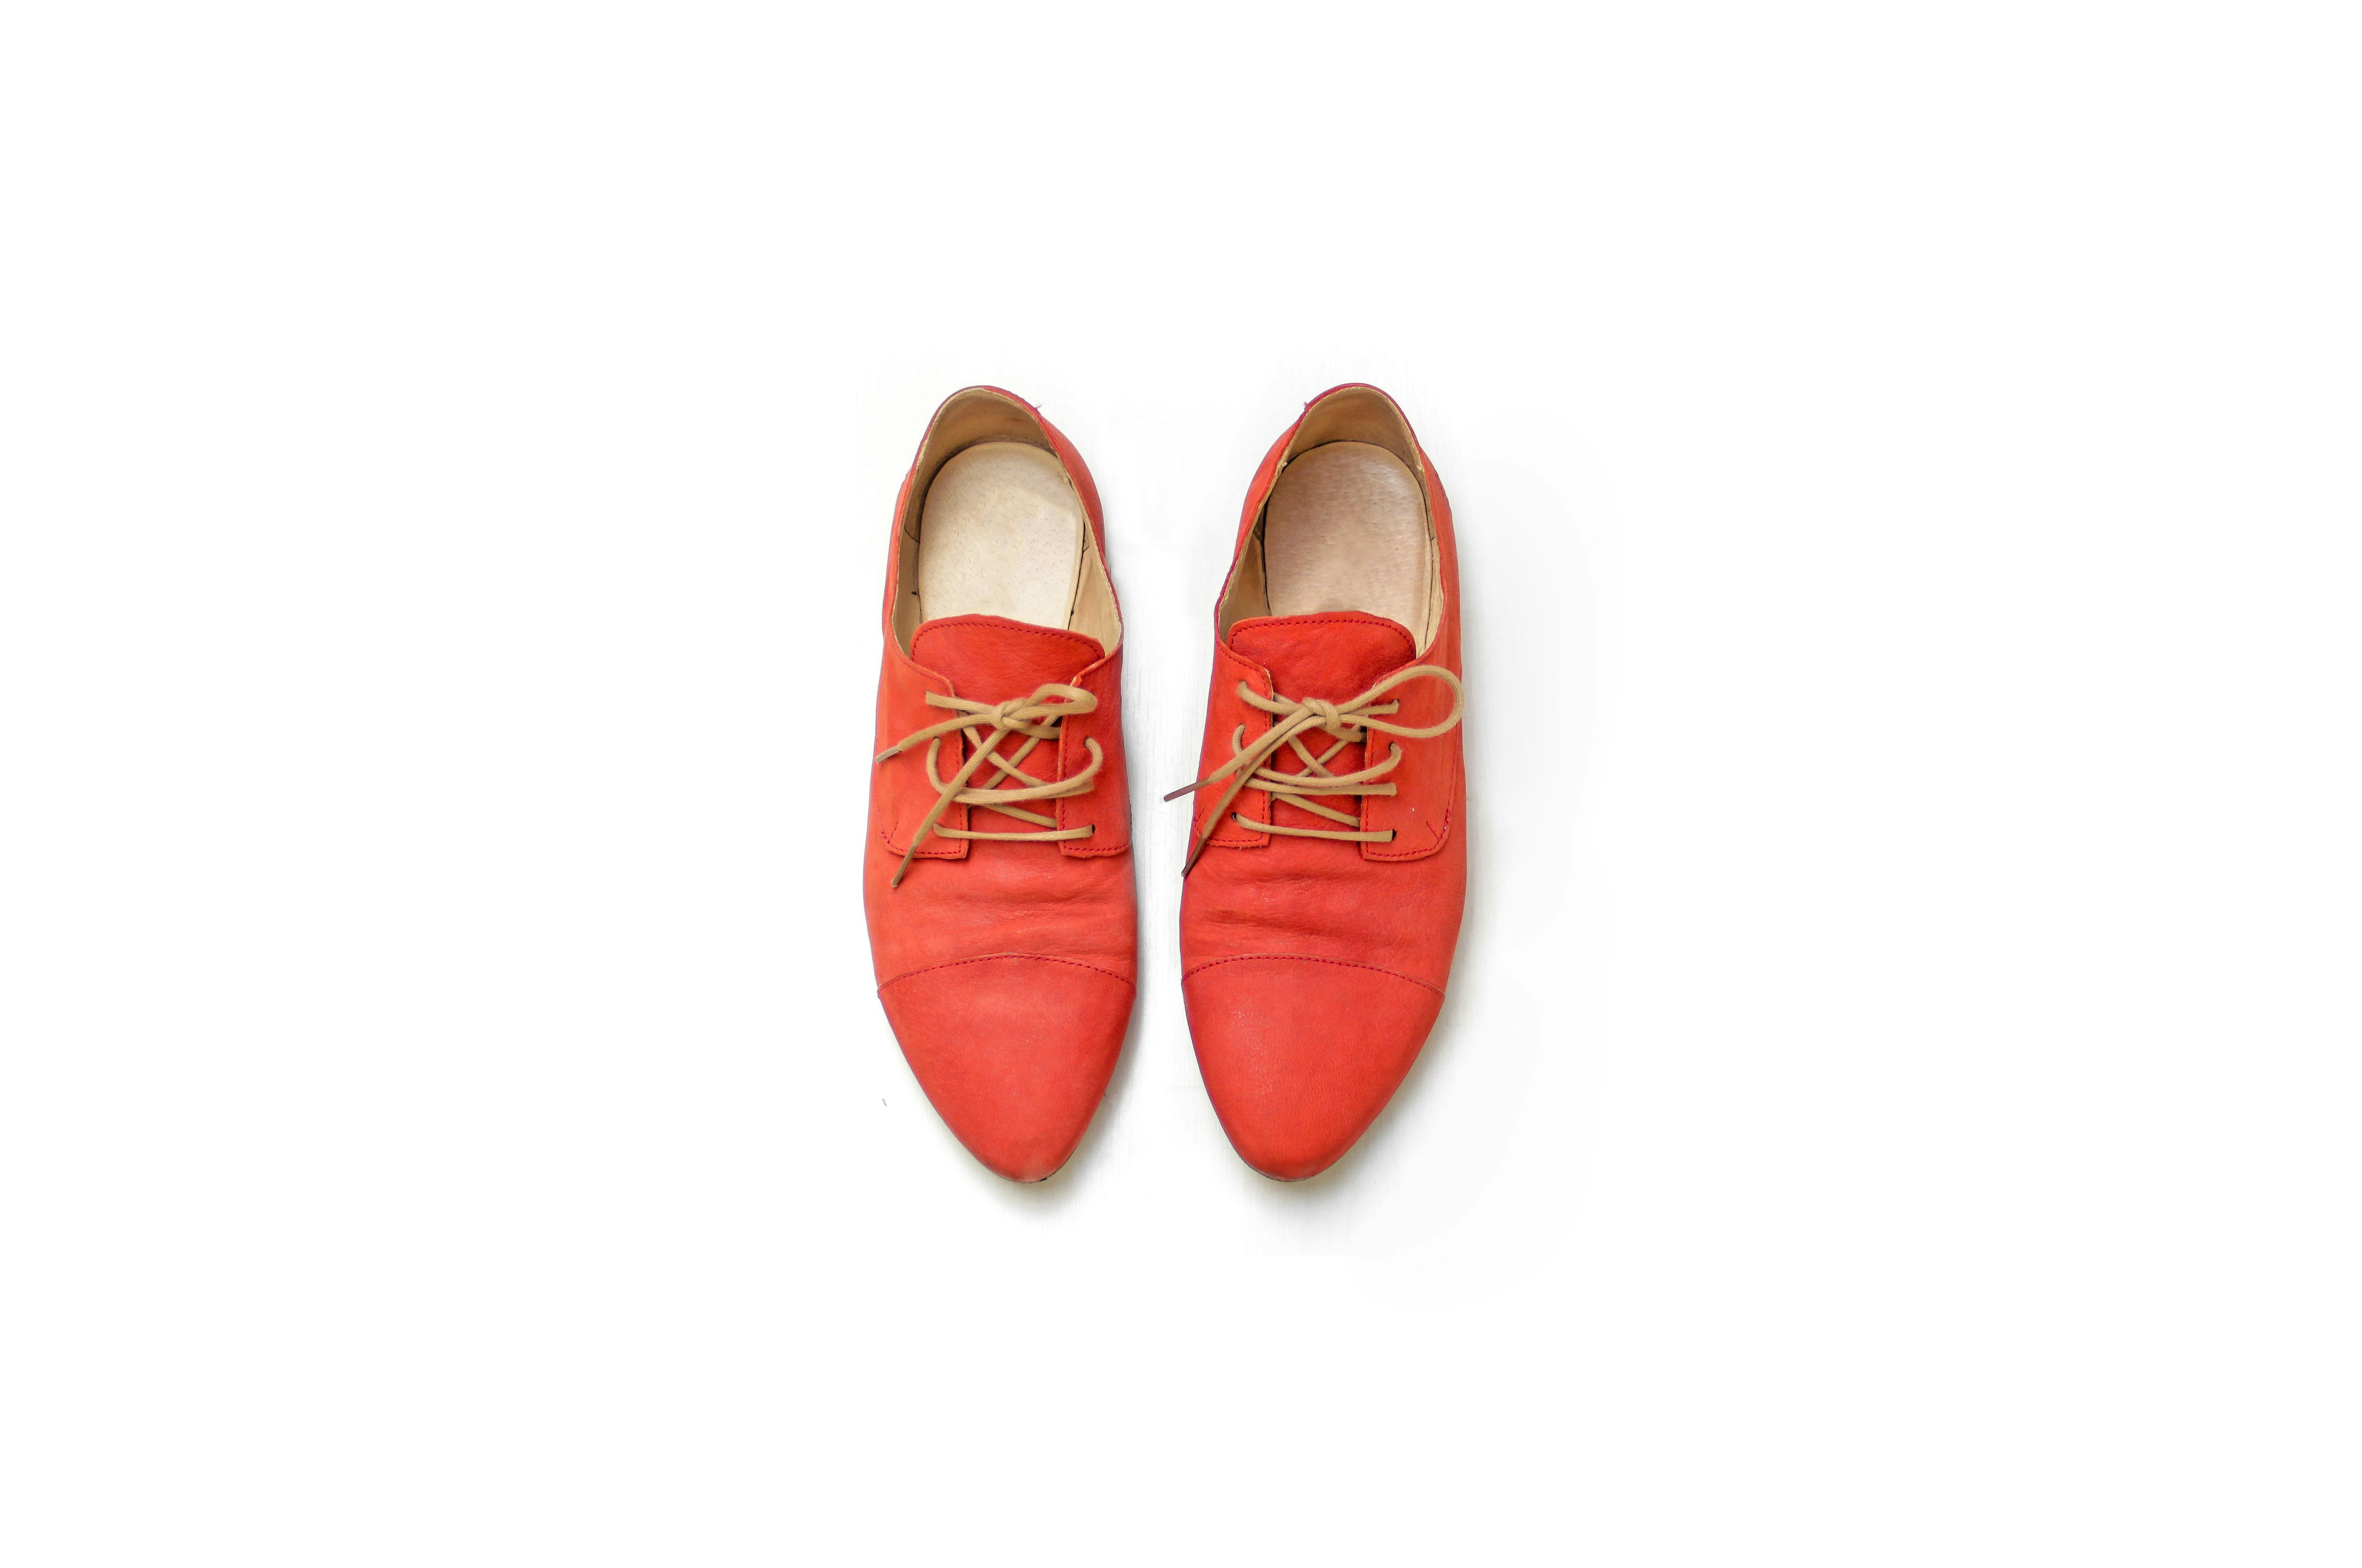 pair of red dress shoes